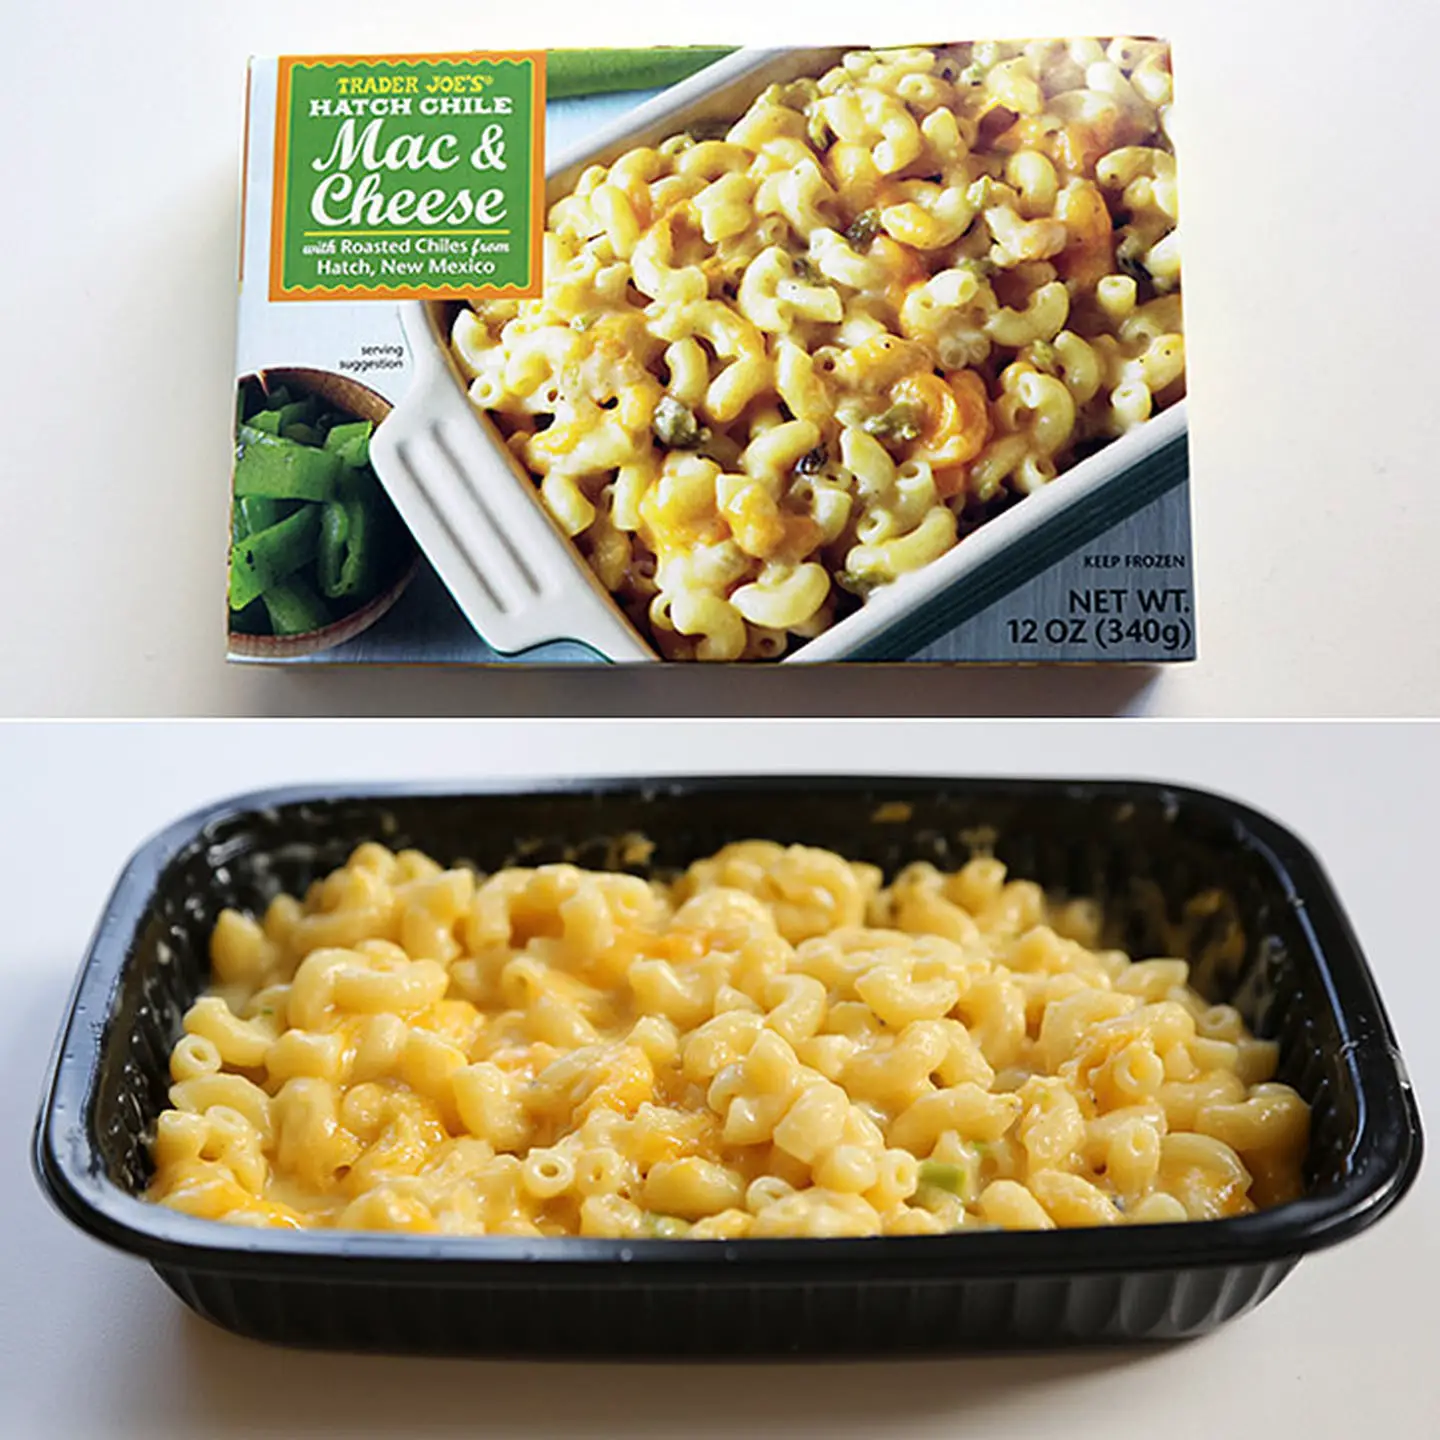 Best Mac and Cheese From Trader Joe